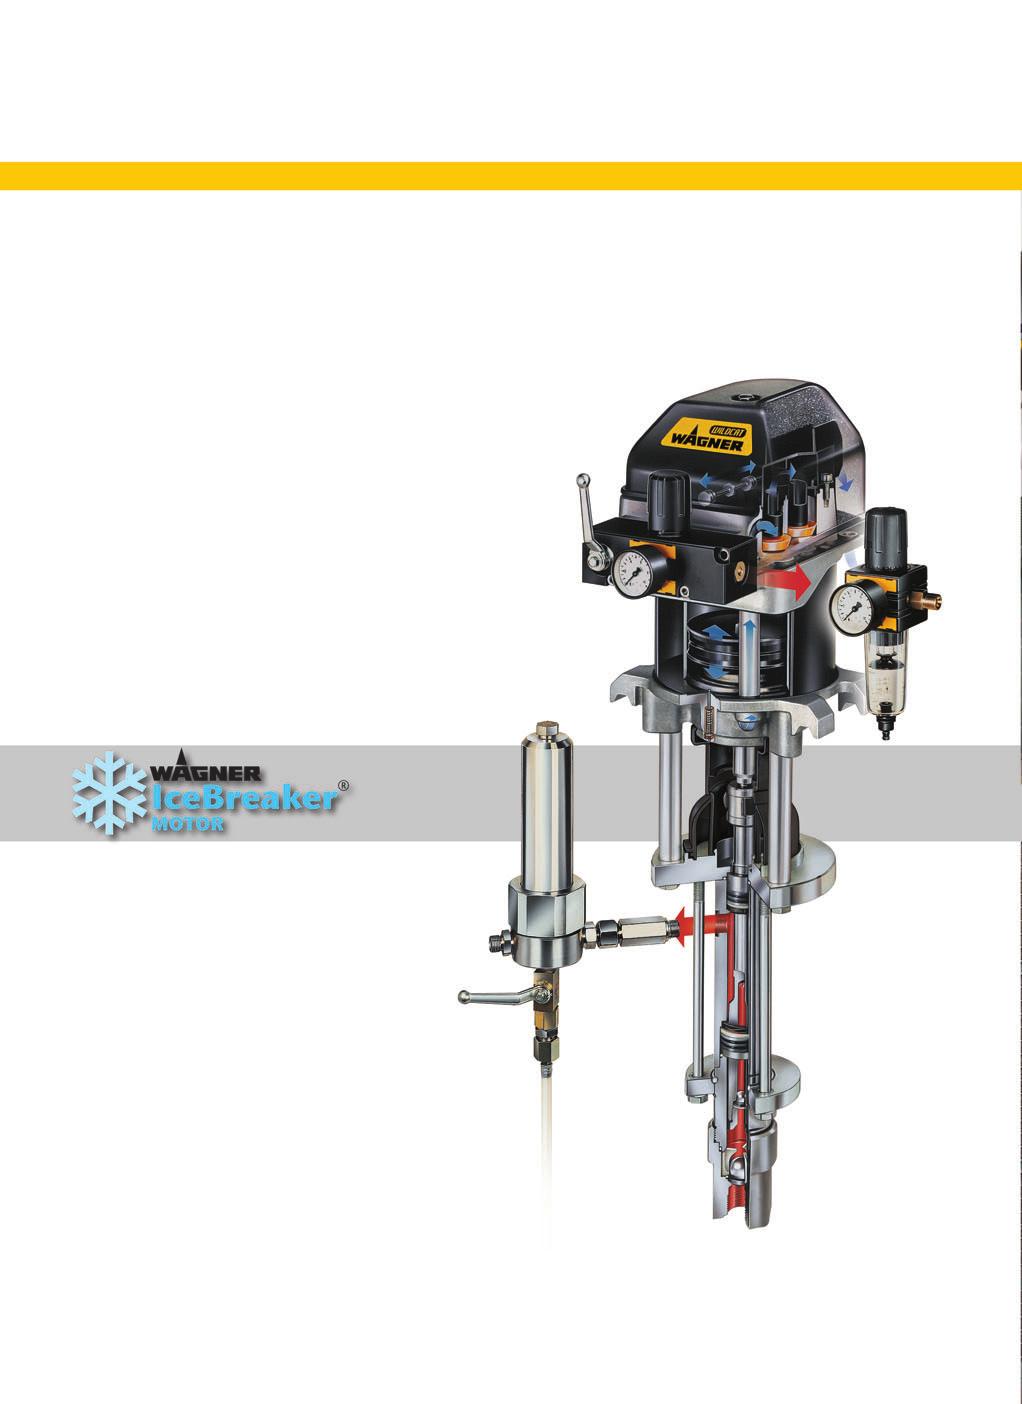 Pneumatic IceBreaker HP piston pumps Pure power! Tiger, Leopard, Puma, Wildcat... With these high pressure piston pumps, WAGNER covers the entire spectrum of industrial and contracting applications.